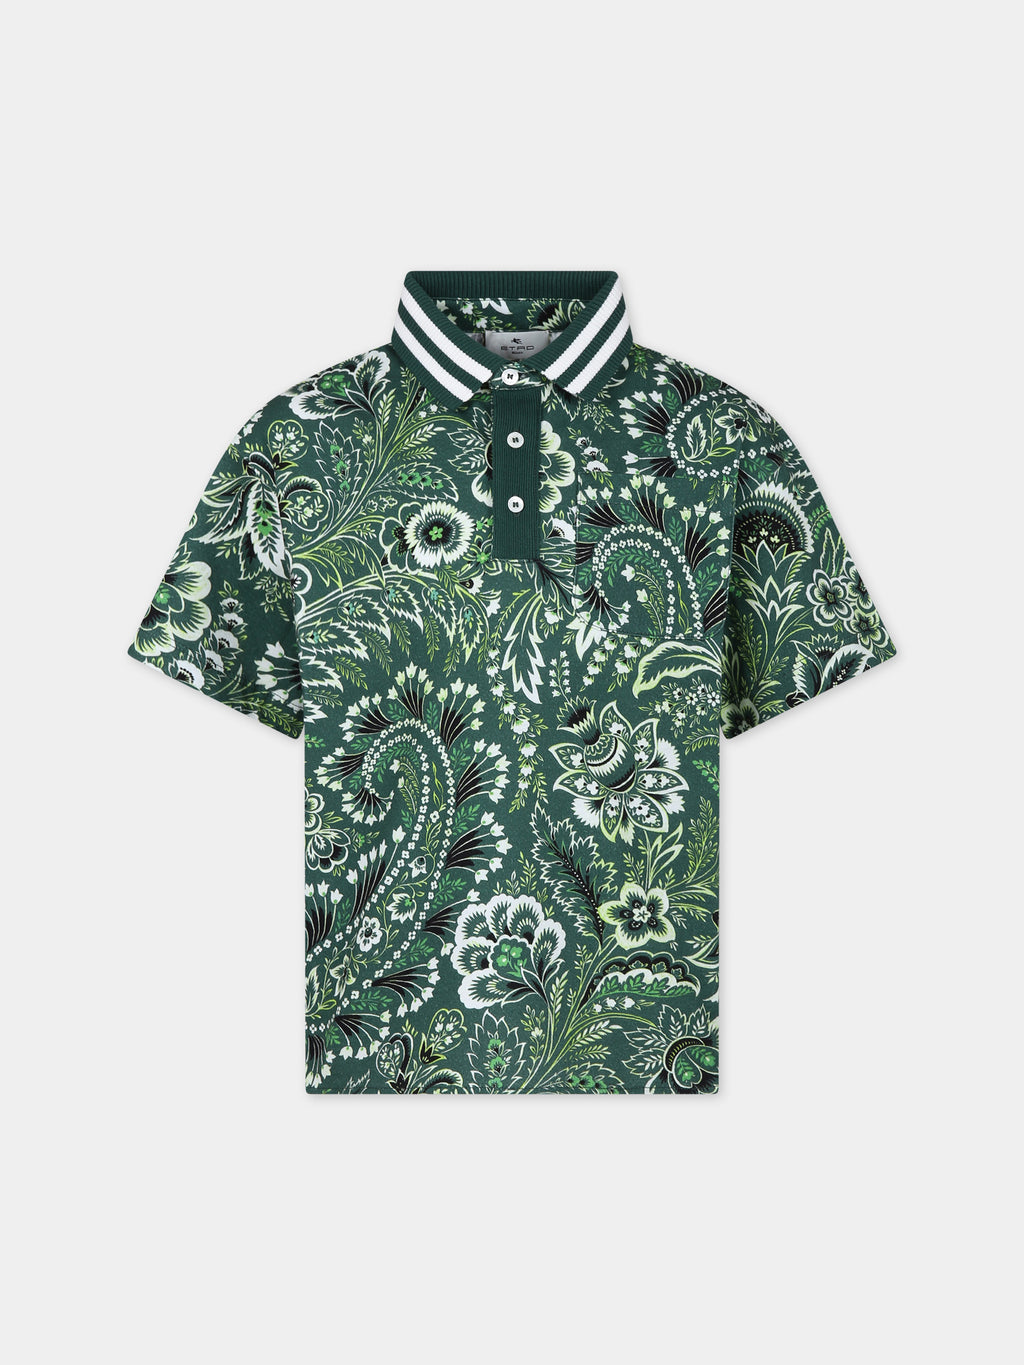 Green polo shirt for boy with paisley pattern